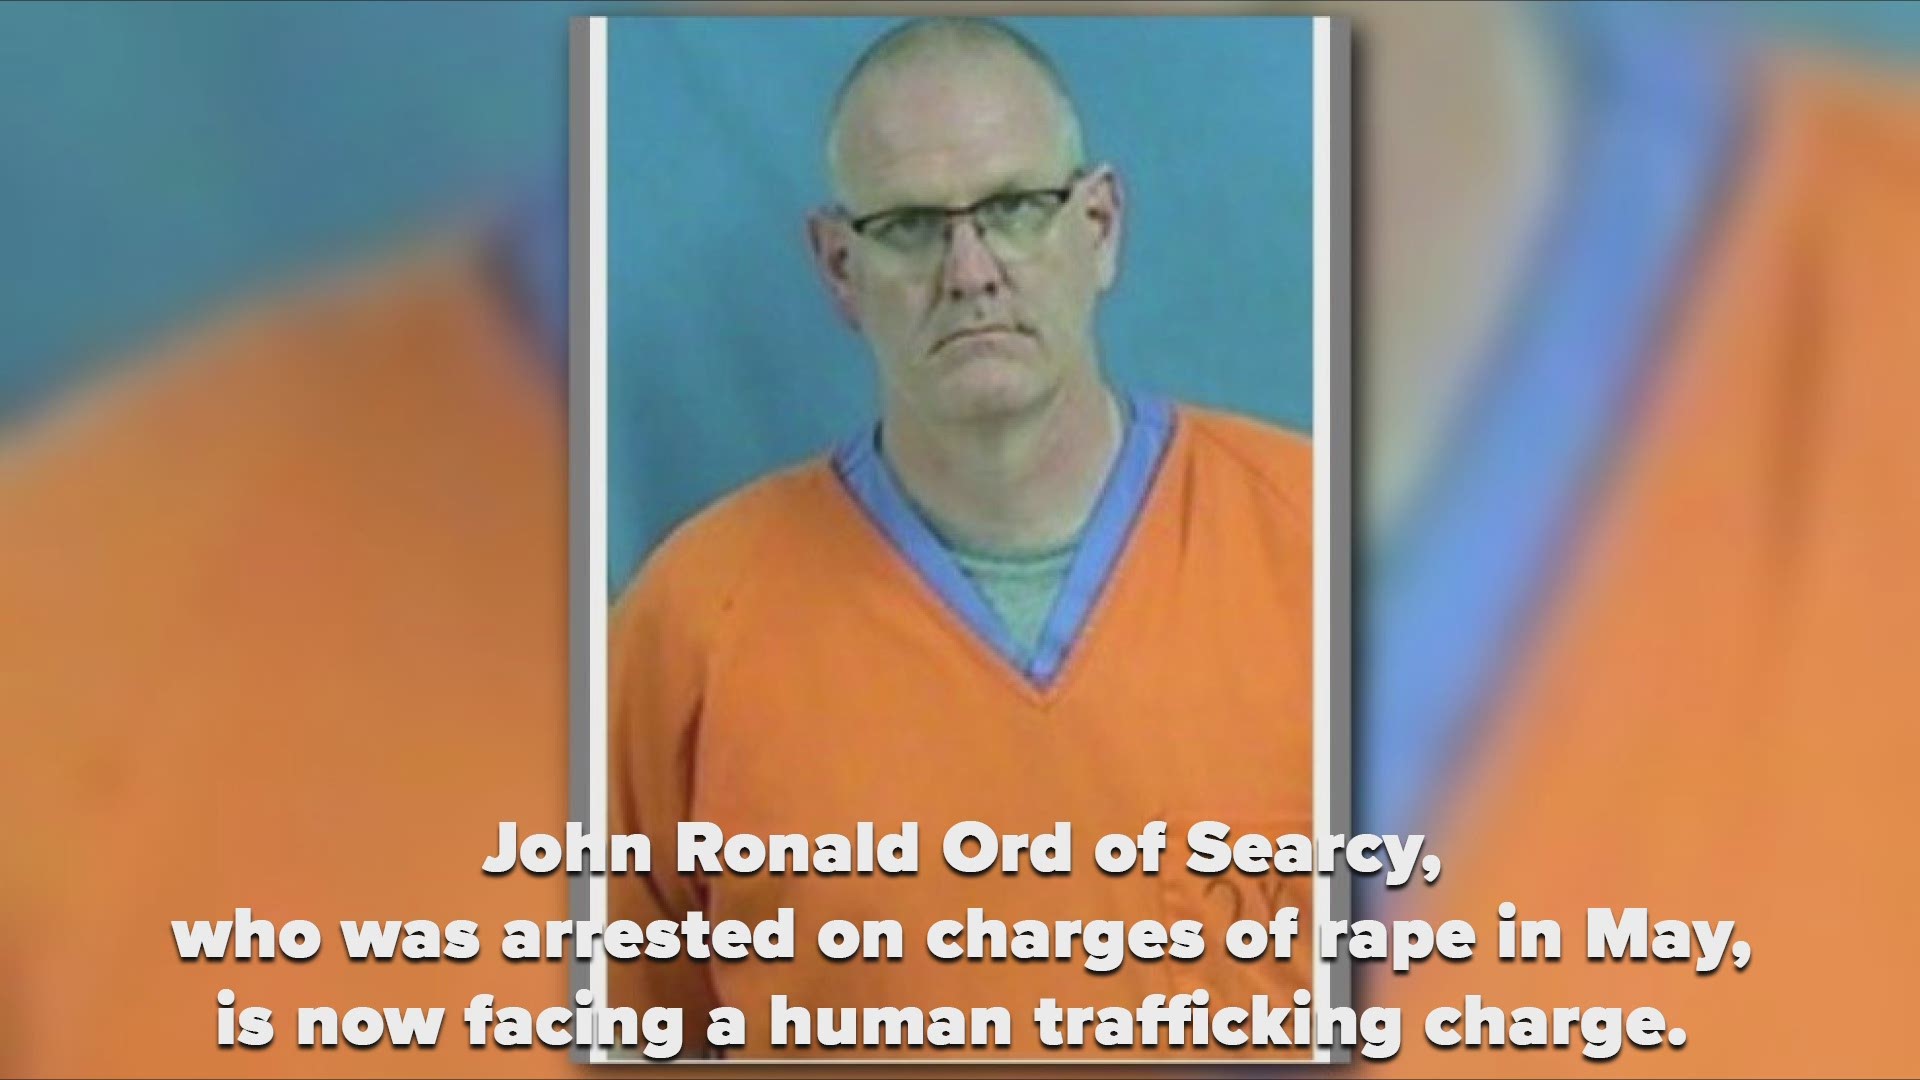 John Ronald Ord of Searcy was arrested on charges of rape in May. He is now facing a new charge of human trafficking.